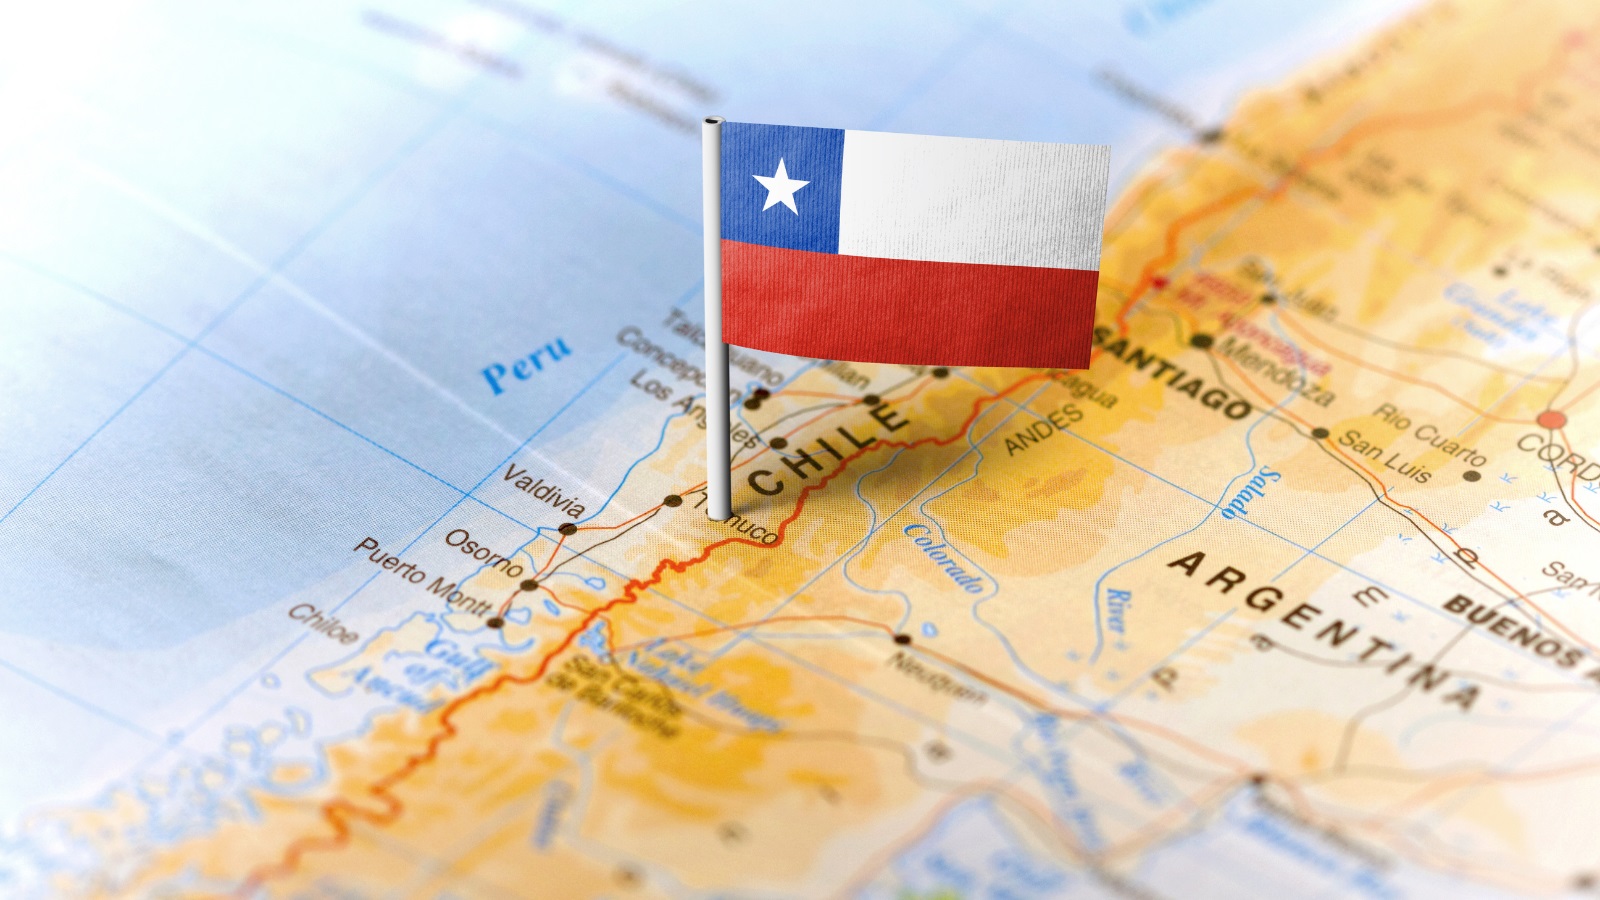 Map showing Chile with Chilean flag